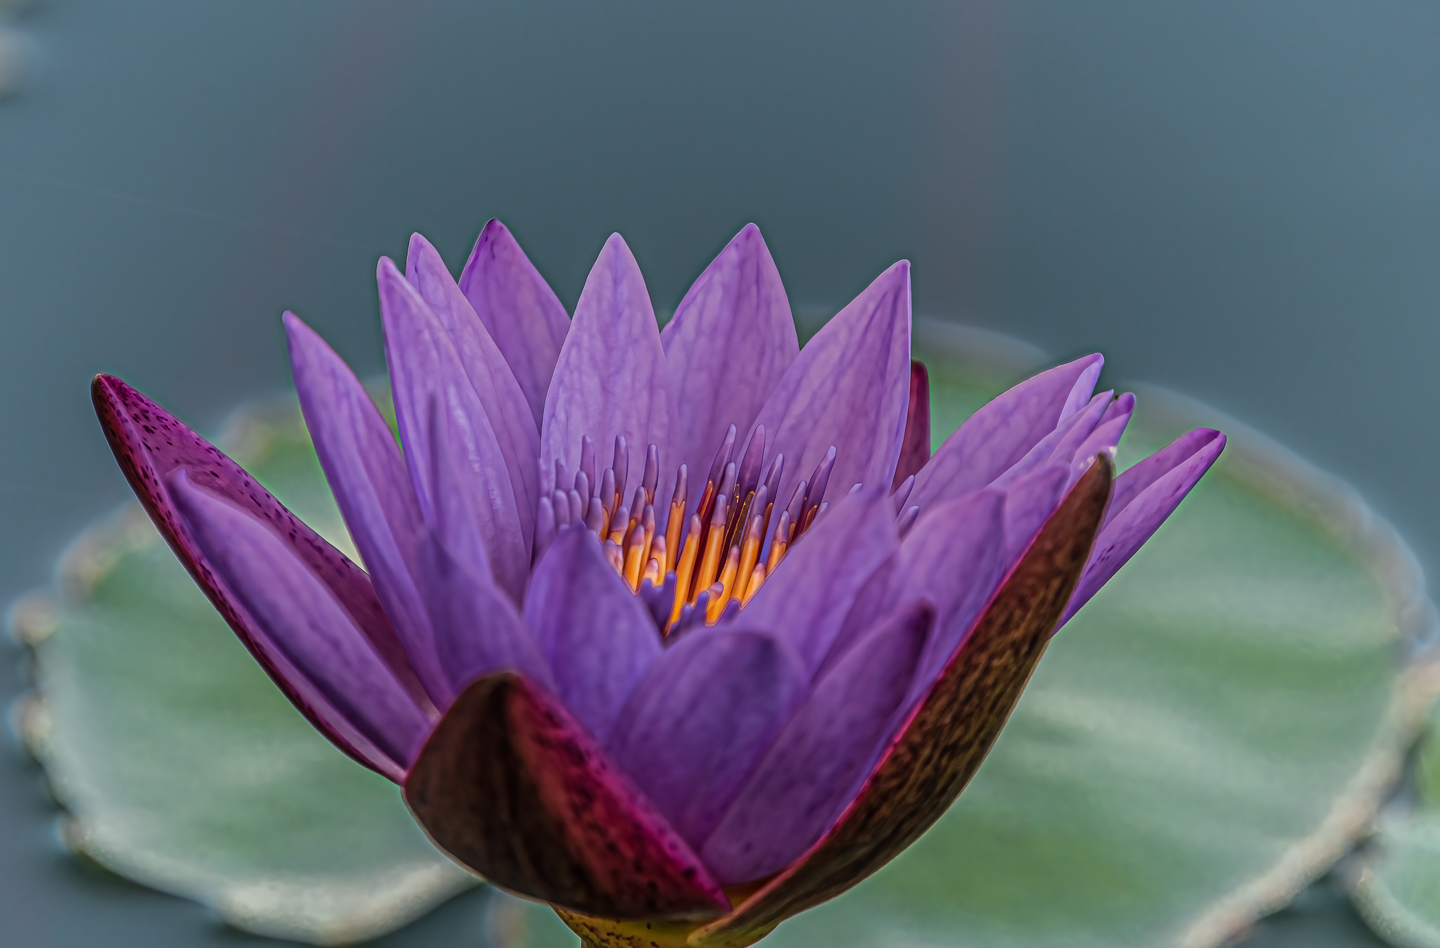 3rd PrizeOpen Color In Class 1 By Kathy Keller For Water Lily In Full Bloom DEC-2021.jpg